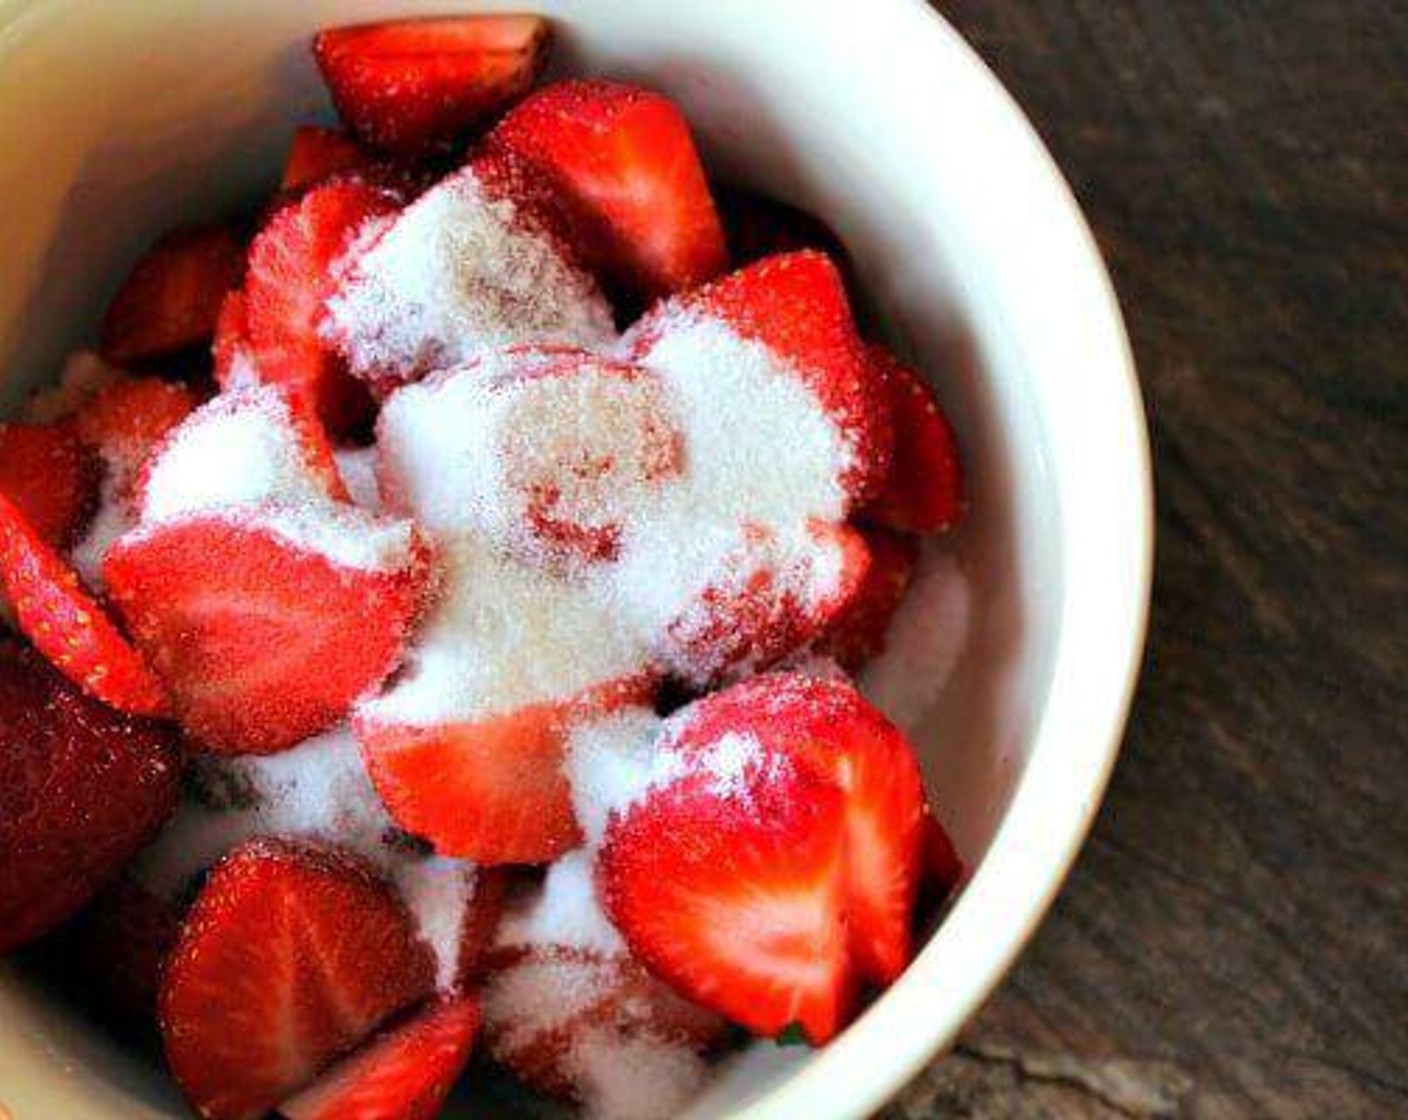 step 1 In a small bowl, mash together the Fresh Strawberries (1 1/2 cups) and Granulated Sugar (1 Tbsp) with a fork.